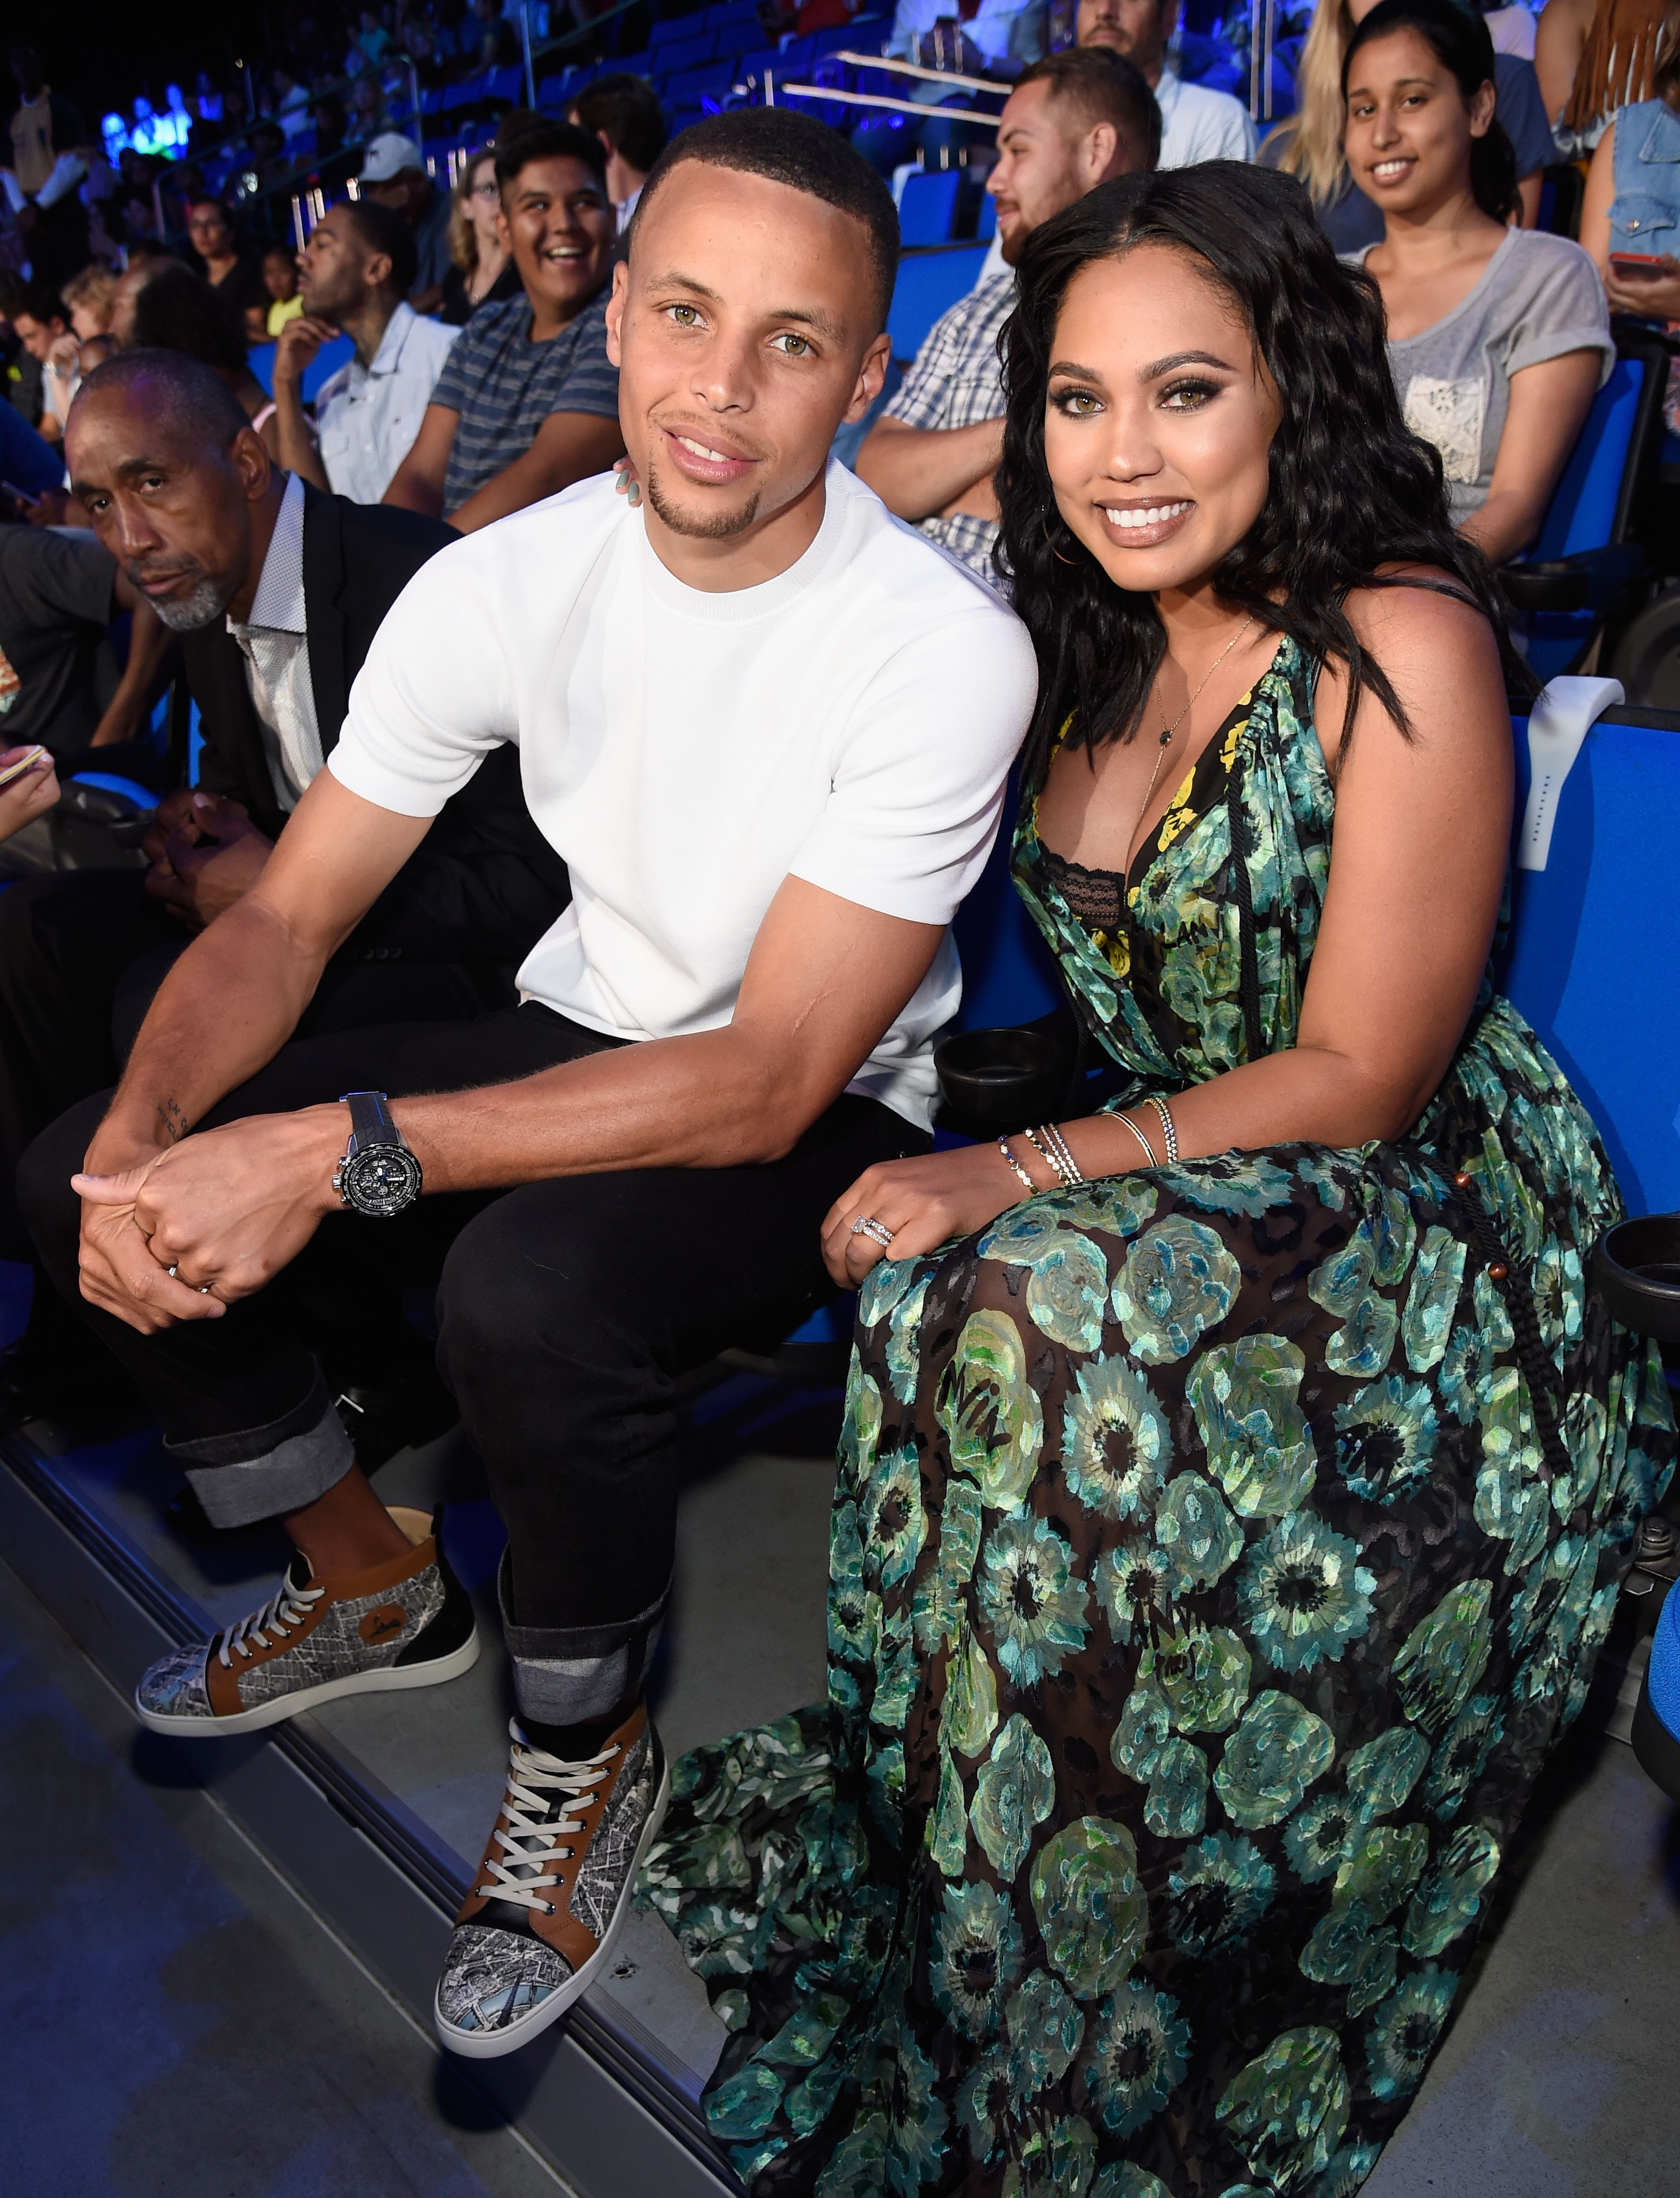 Stephen Curry and Ayesha Curry attend the Nickelodeon Kids' Choice Sports Awards 2016 at UCLA's Pauley Pavilion on July 14, 2016 in Westwood, California. | Source: Getty Images